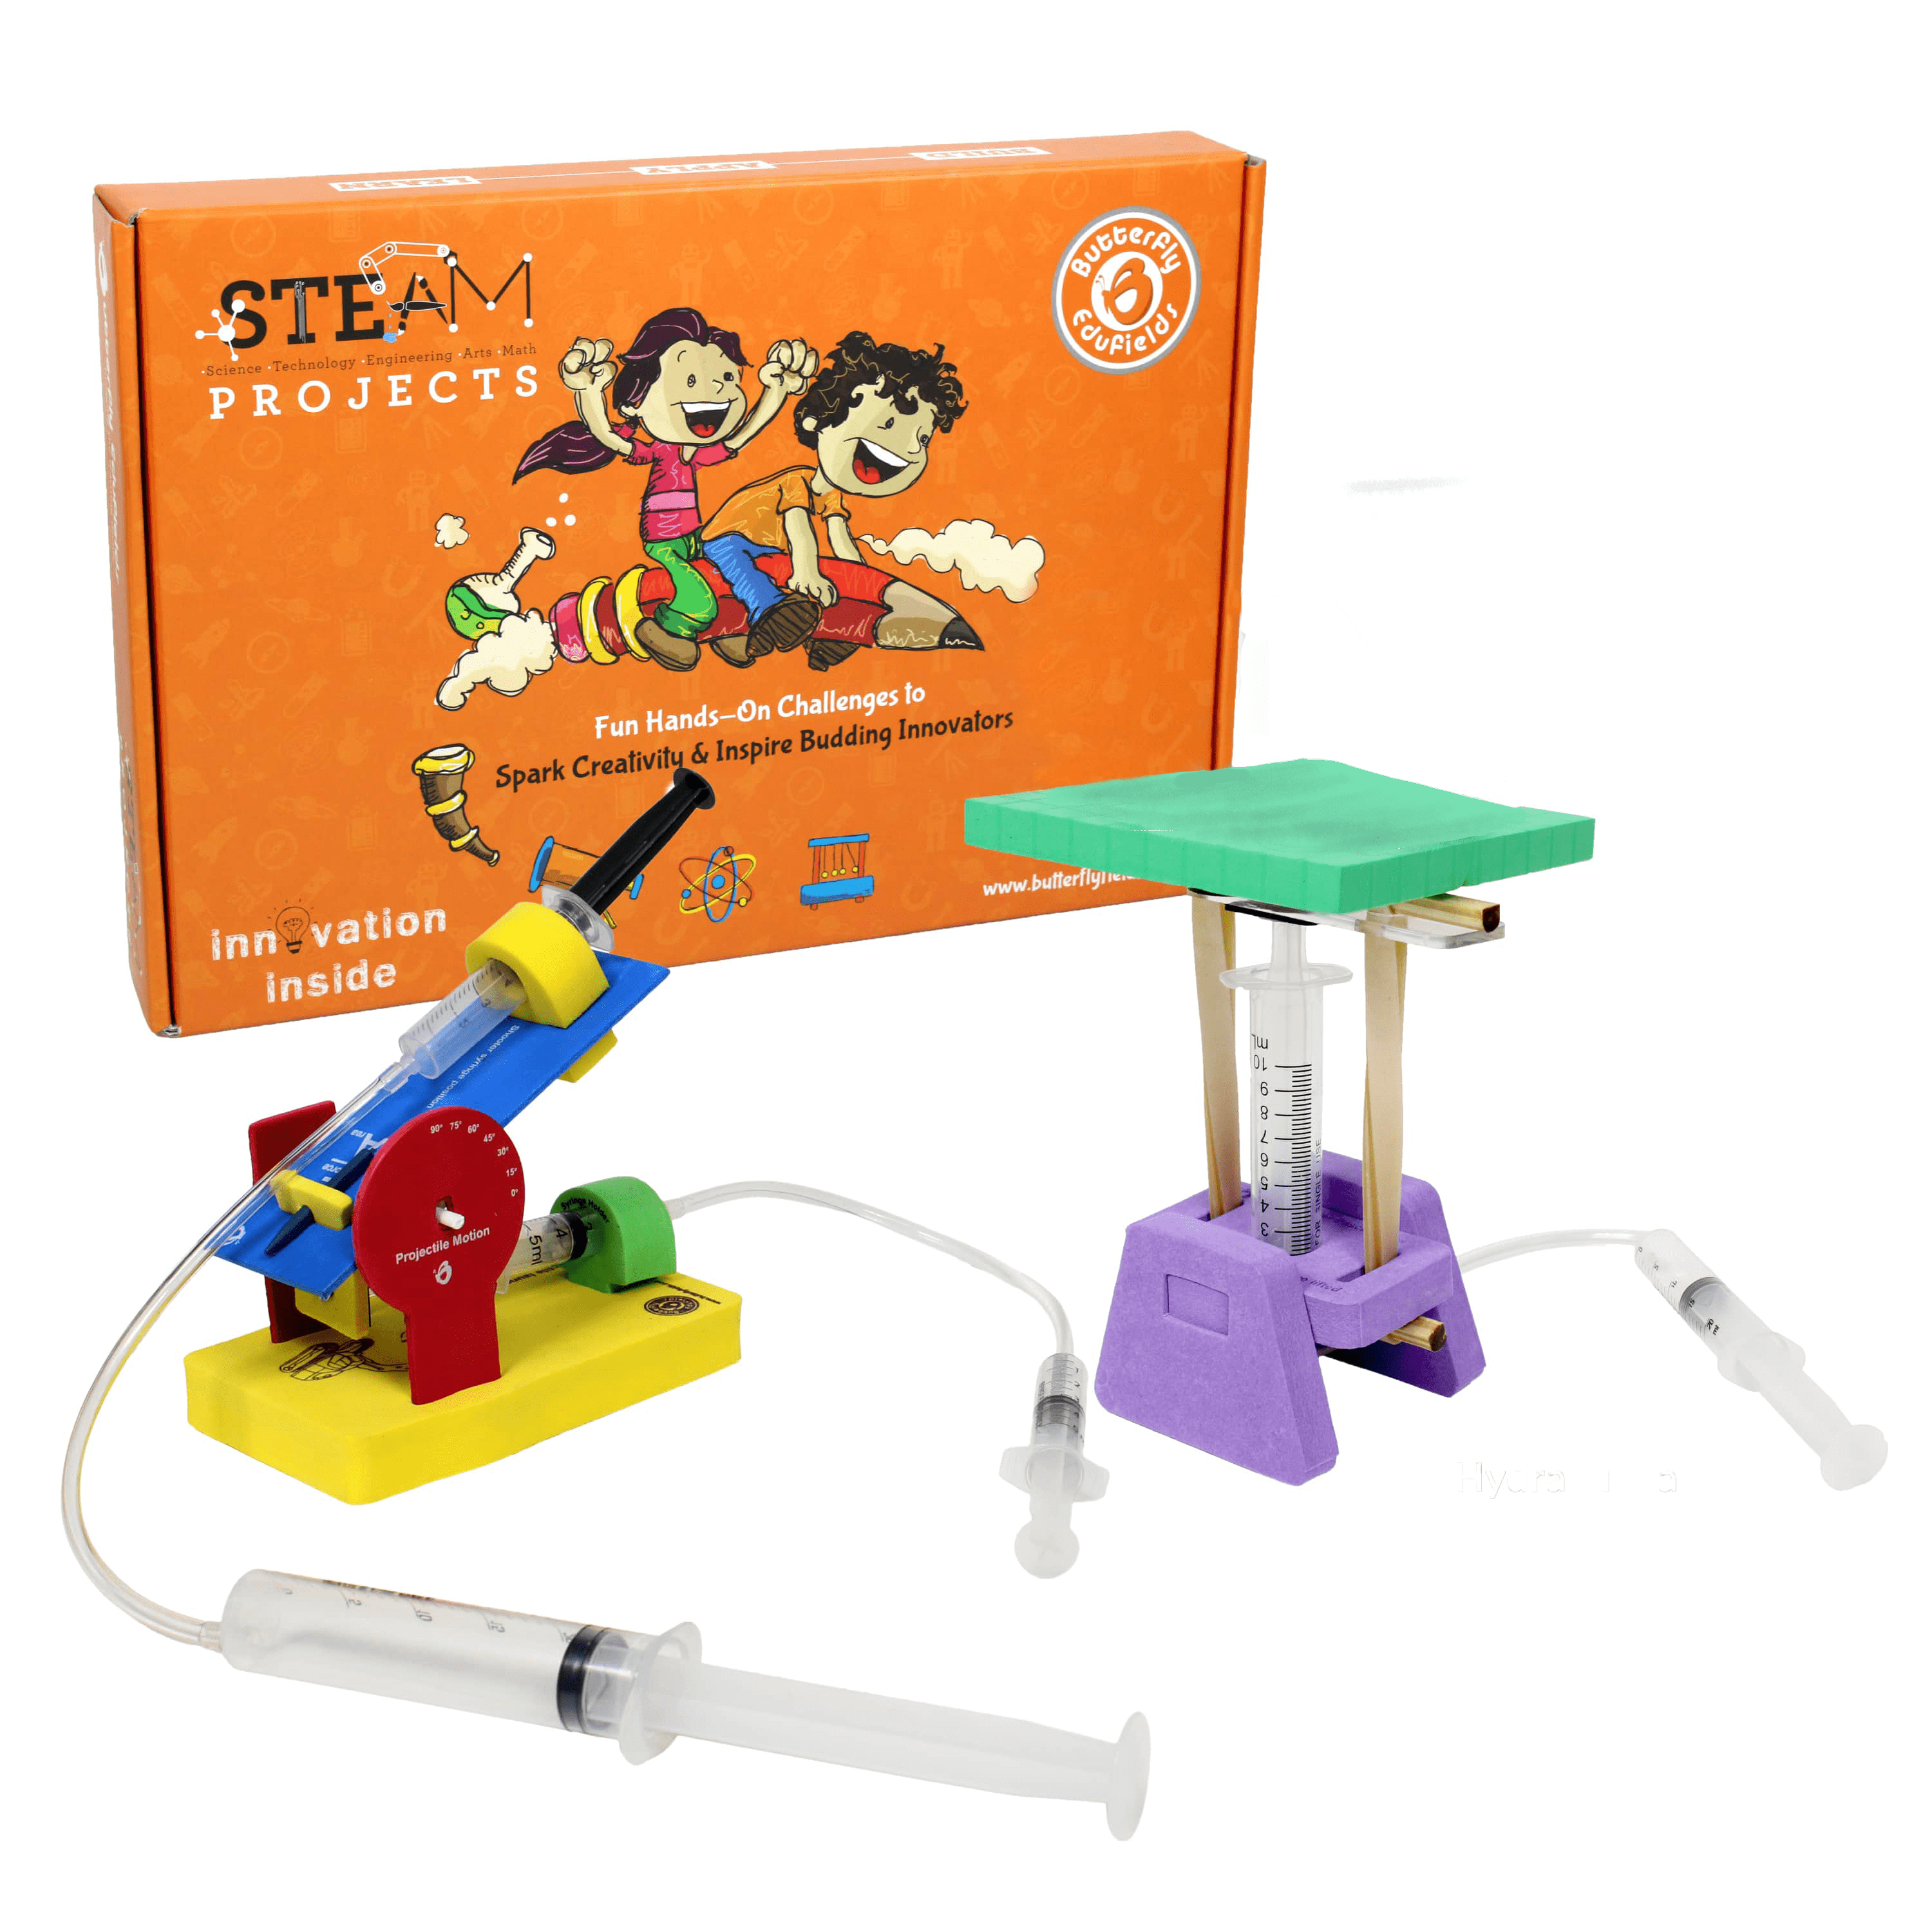 Hydraulic Shooter STEM Toy freeshipping - Butterfly EduFields